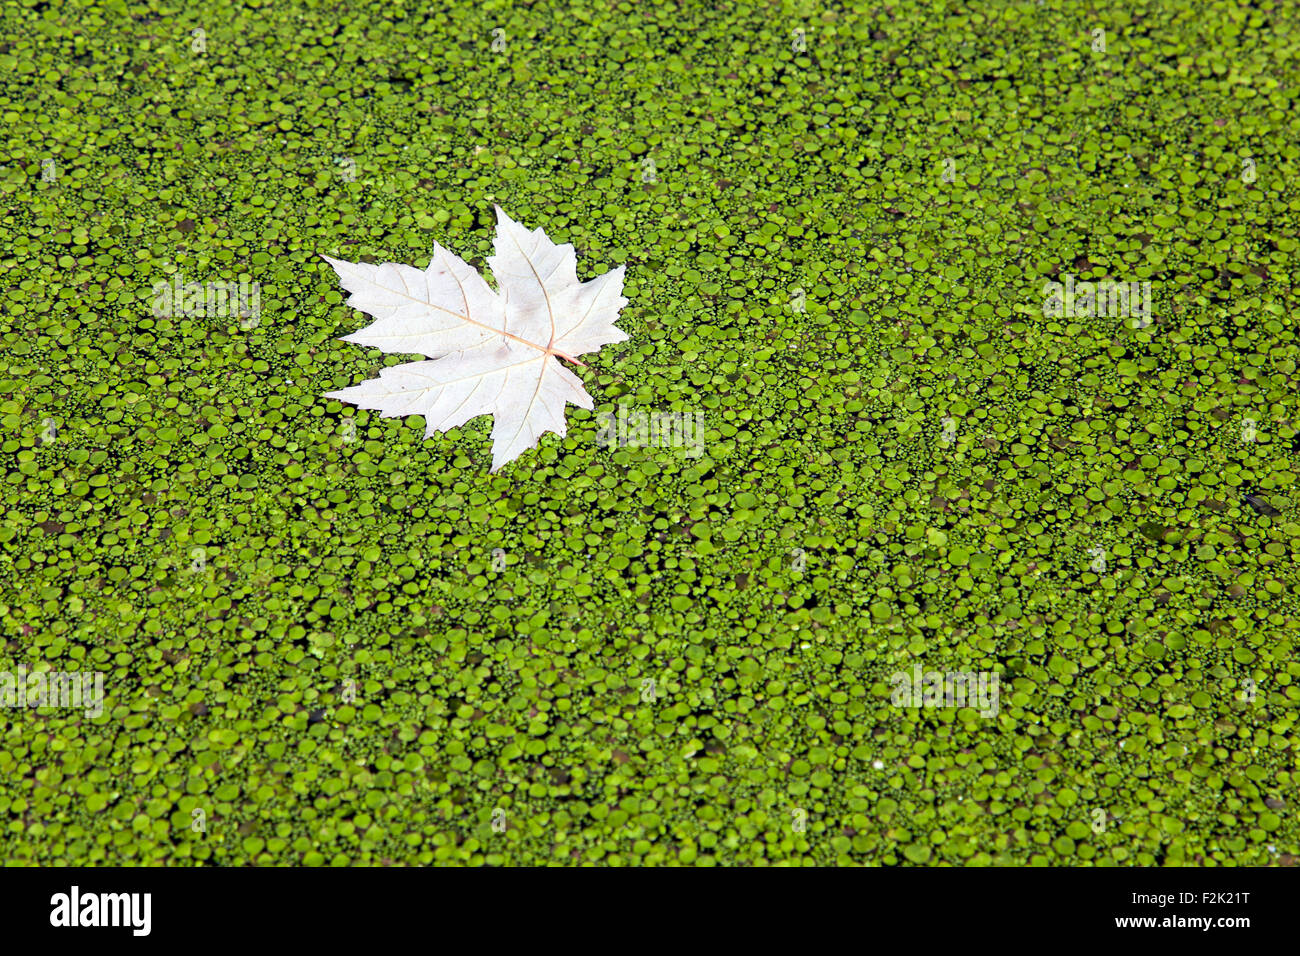 A leaf in duckweed Stock Photo